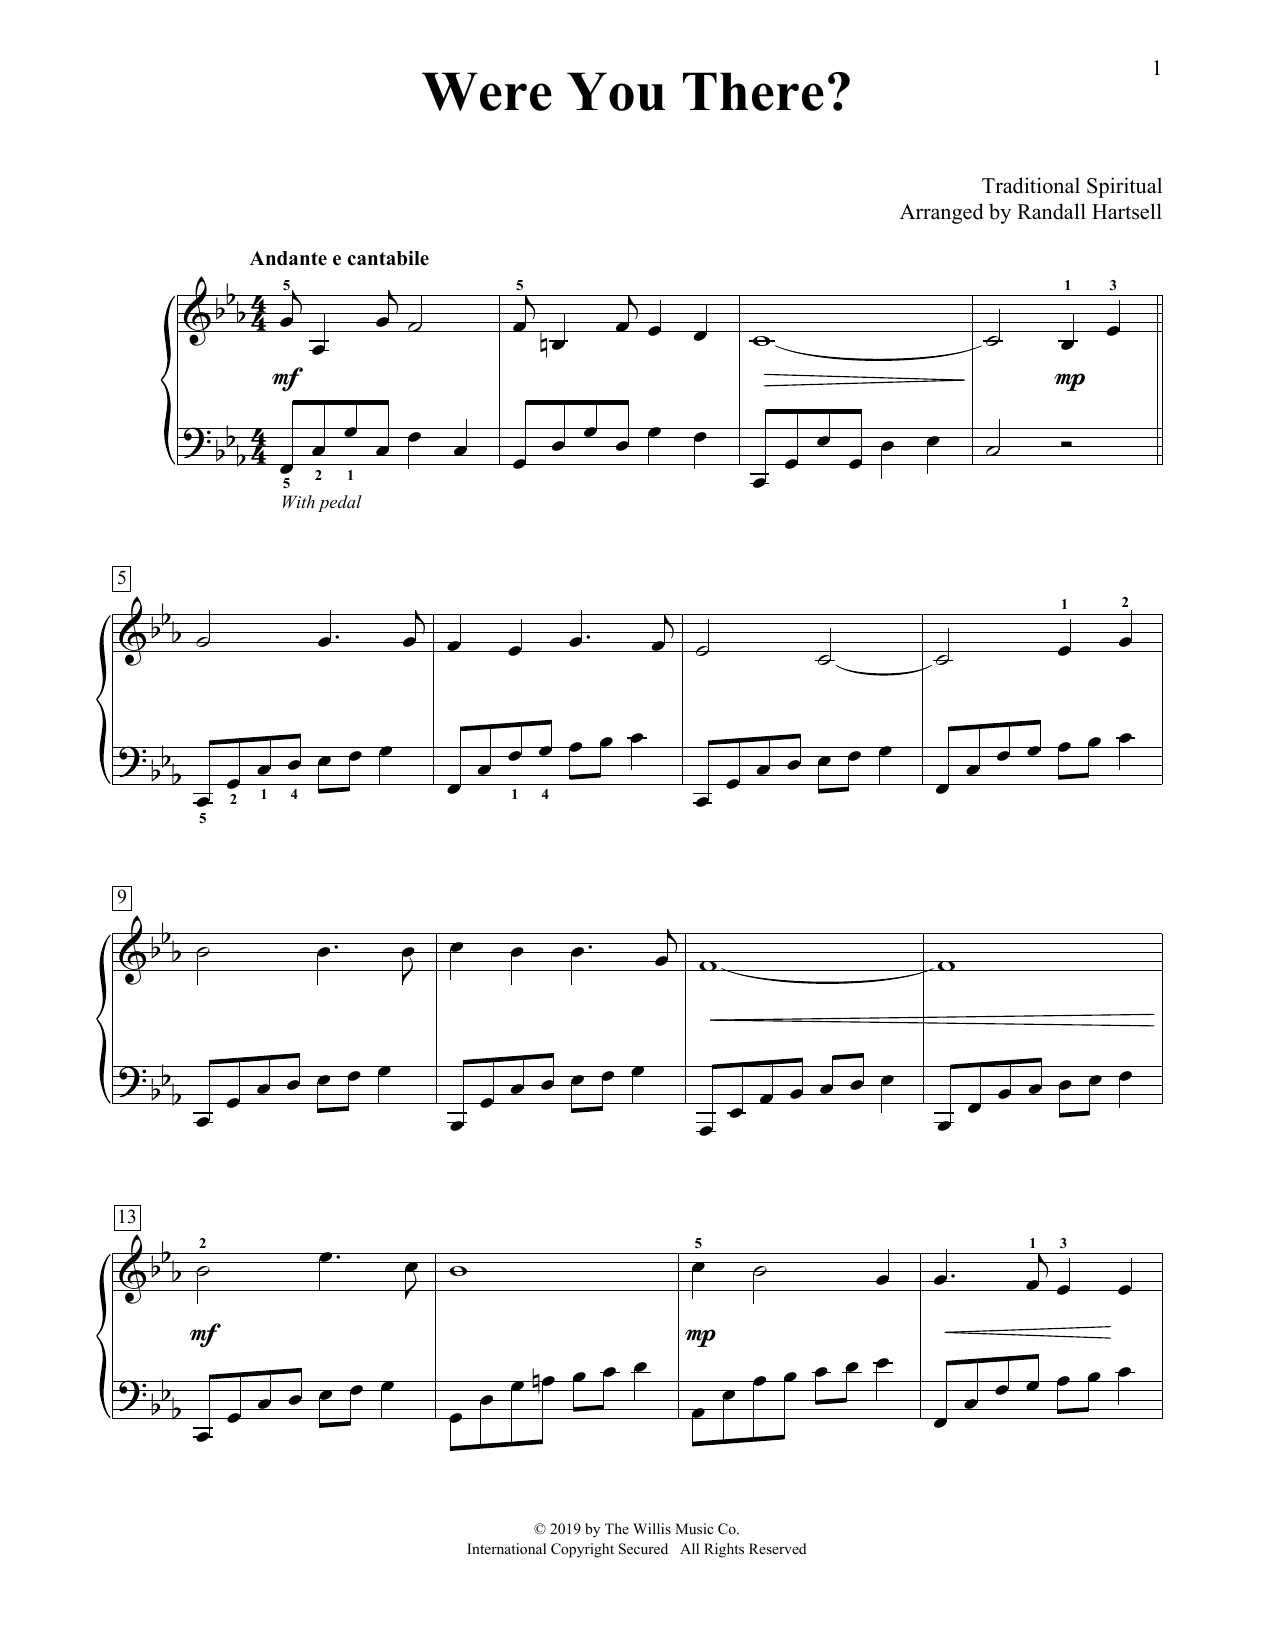 Download Traditional Spiritual Were You There? (arr. Randall Hartsell) Sheet Music